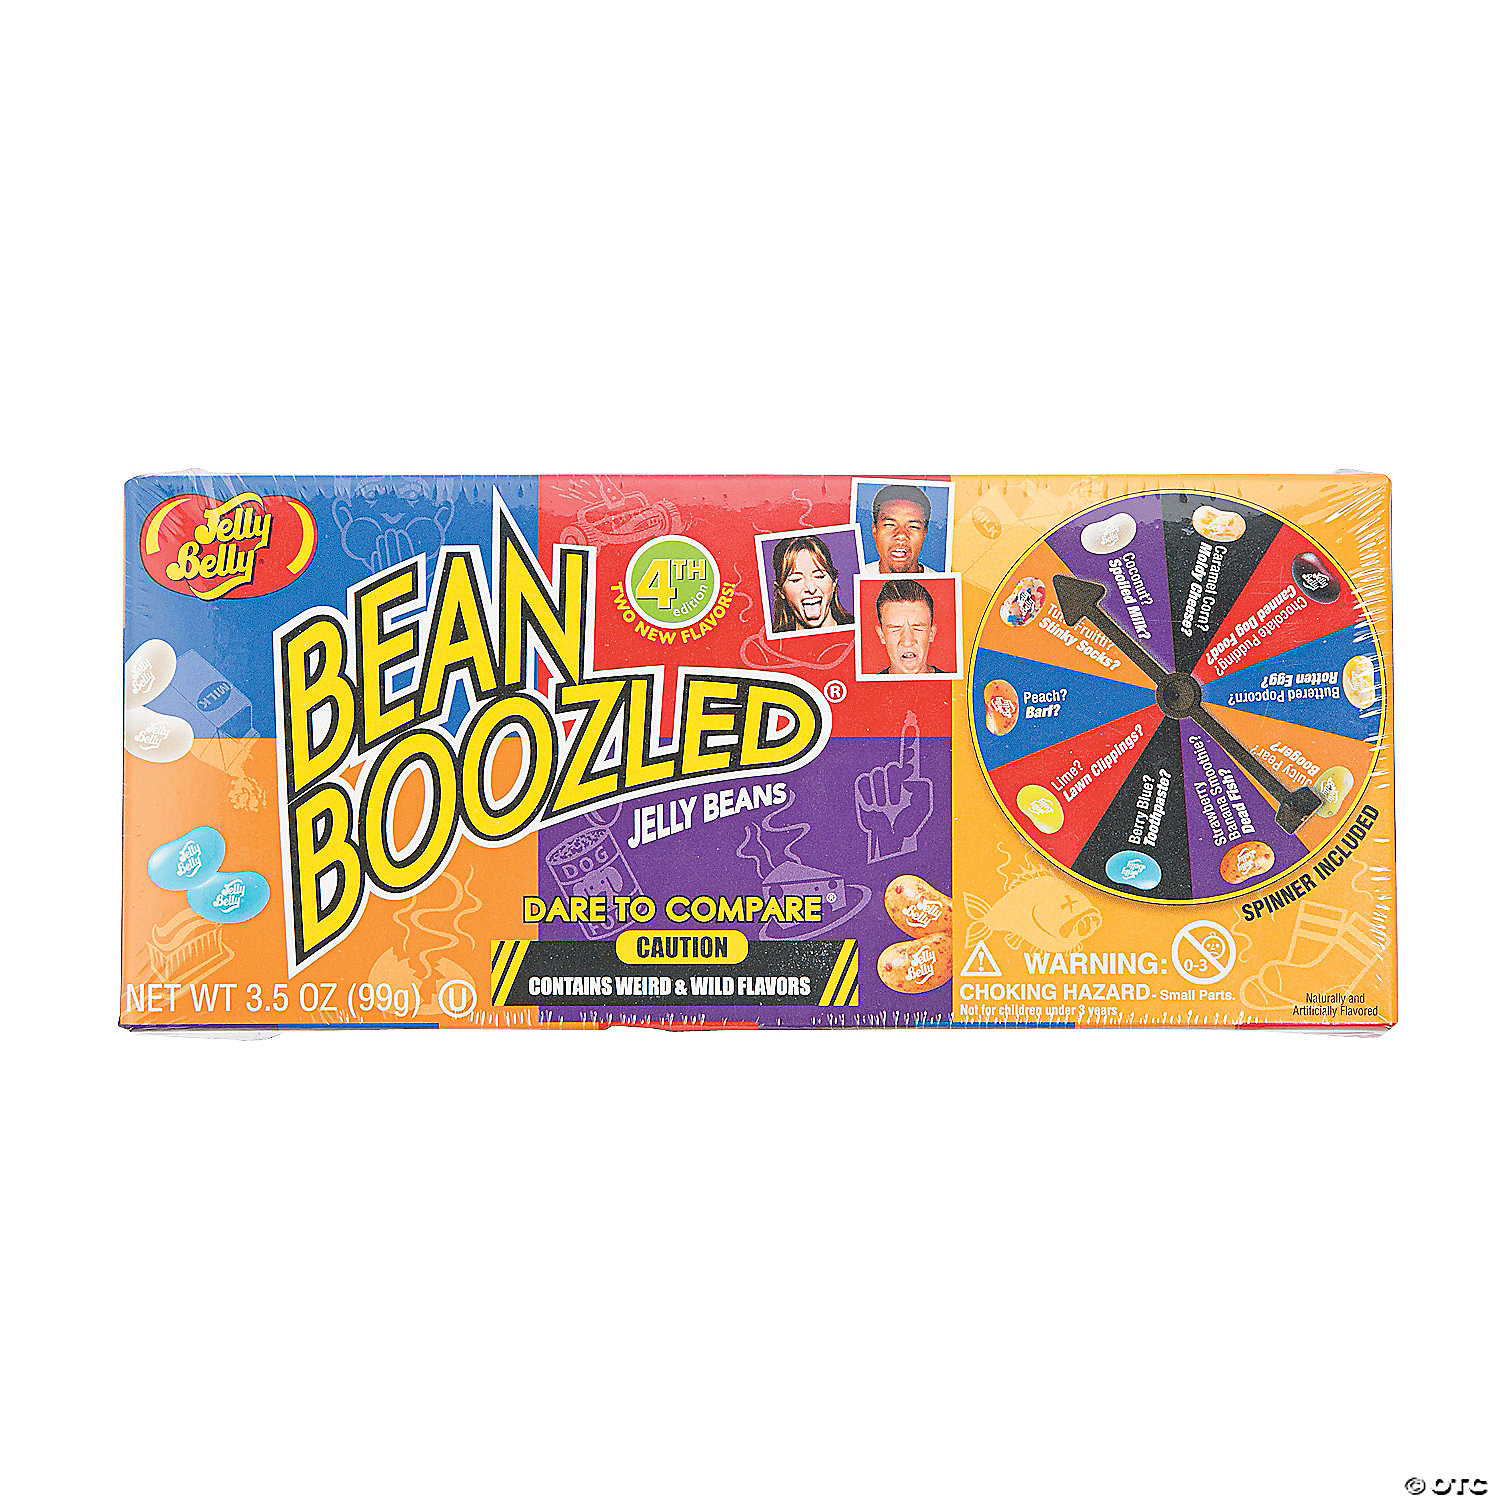 Jelly Belly® Bean Boozled® 4th Edition